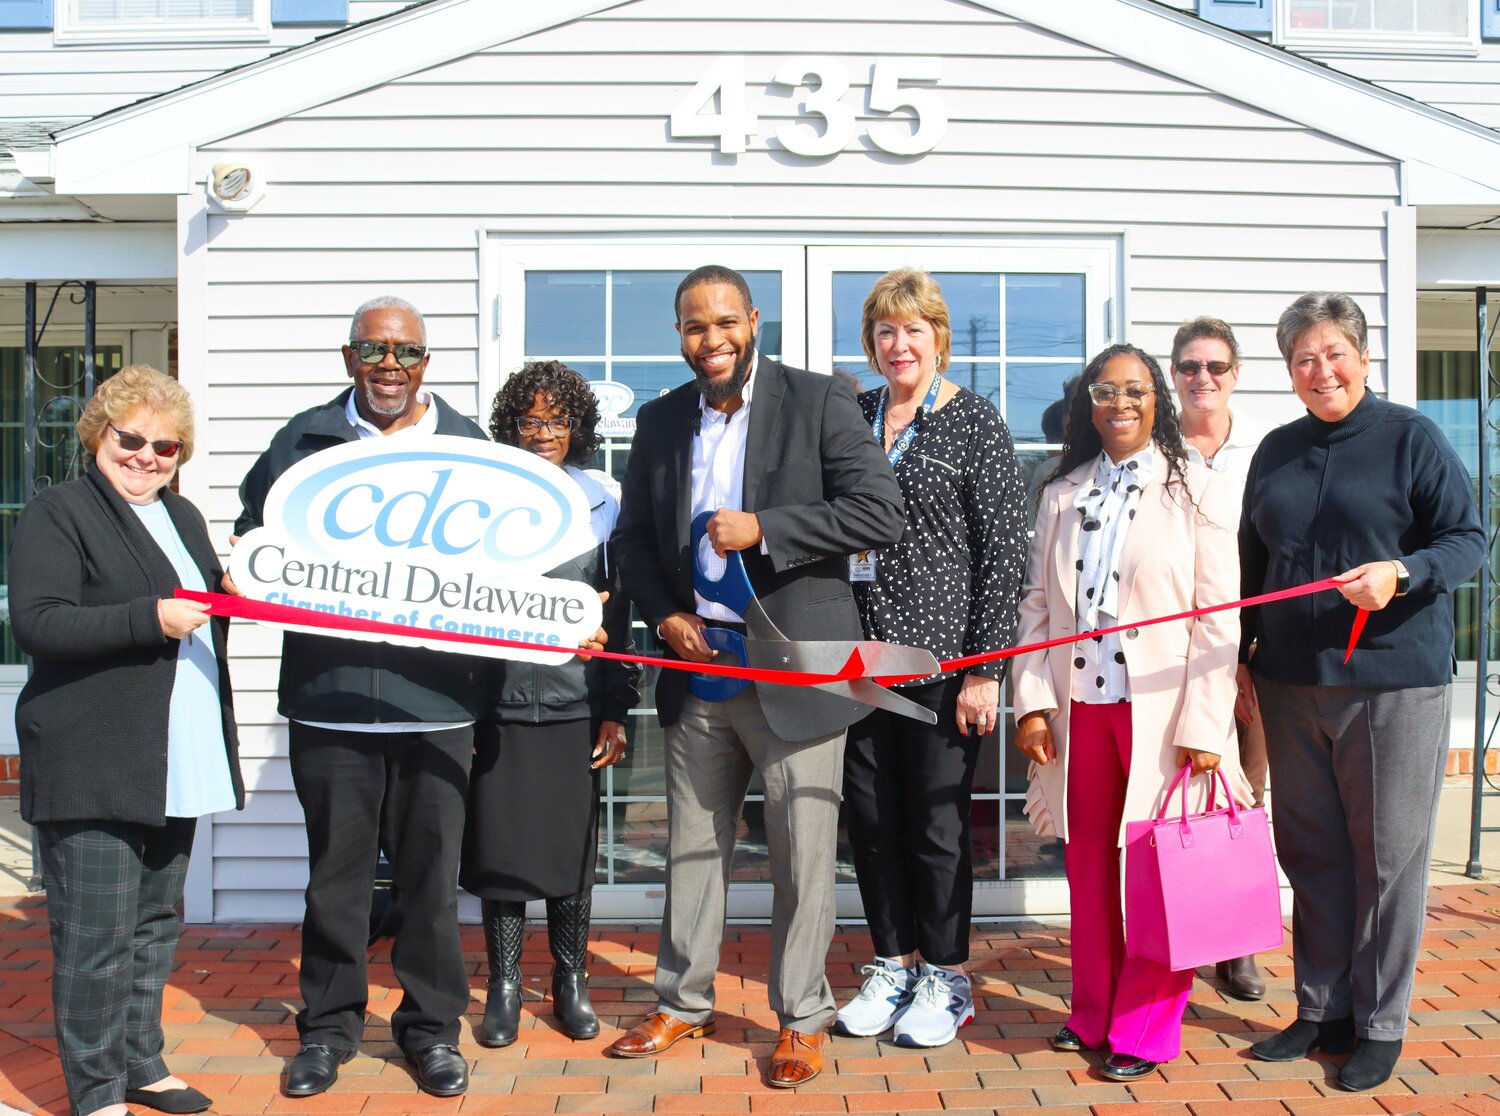 Central Delaware Chamber of Commerce members and friends joined Jason King and the LegalShield team to celebrate Legal Shield - Jason King’s 5-year anniversary in Central Delaware.